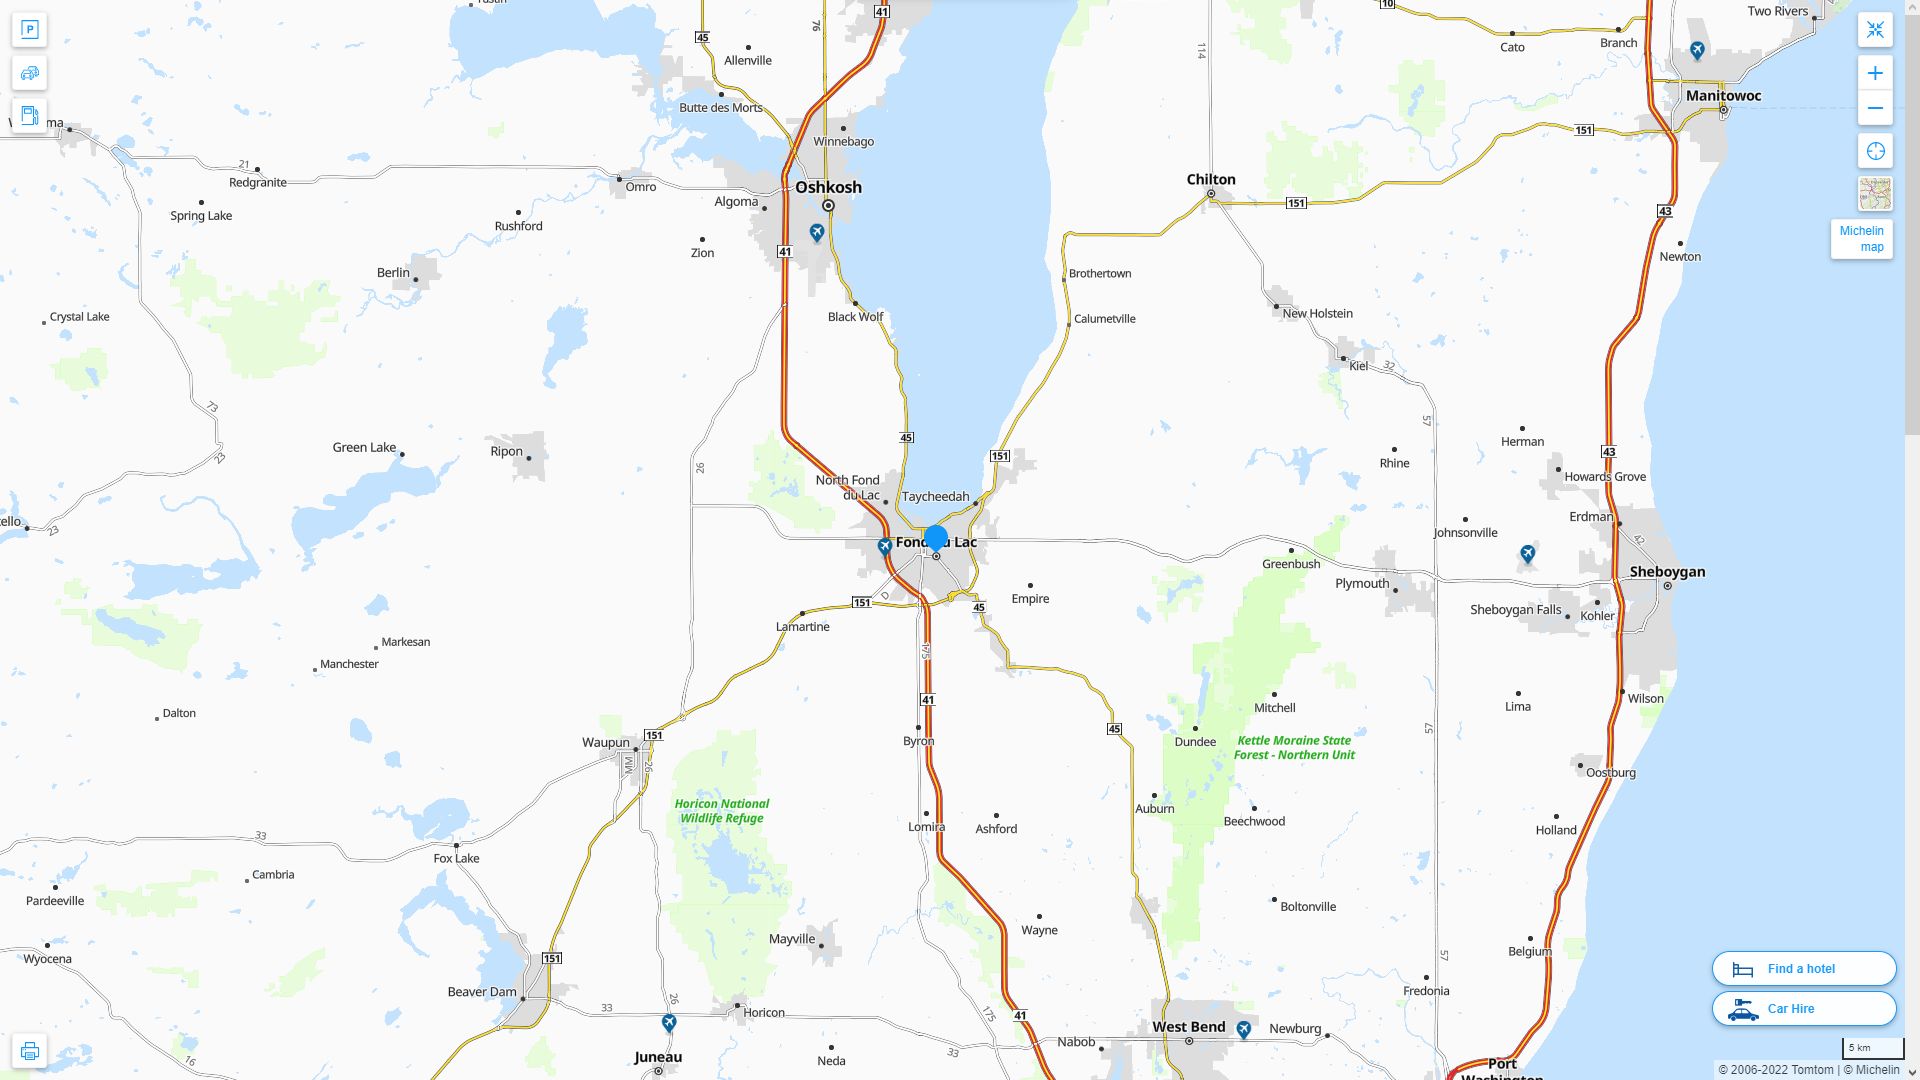 Fond du Lac Wisconsin Highway and Road Map